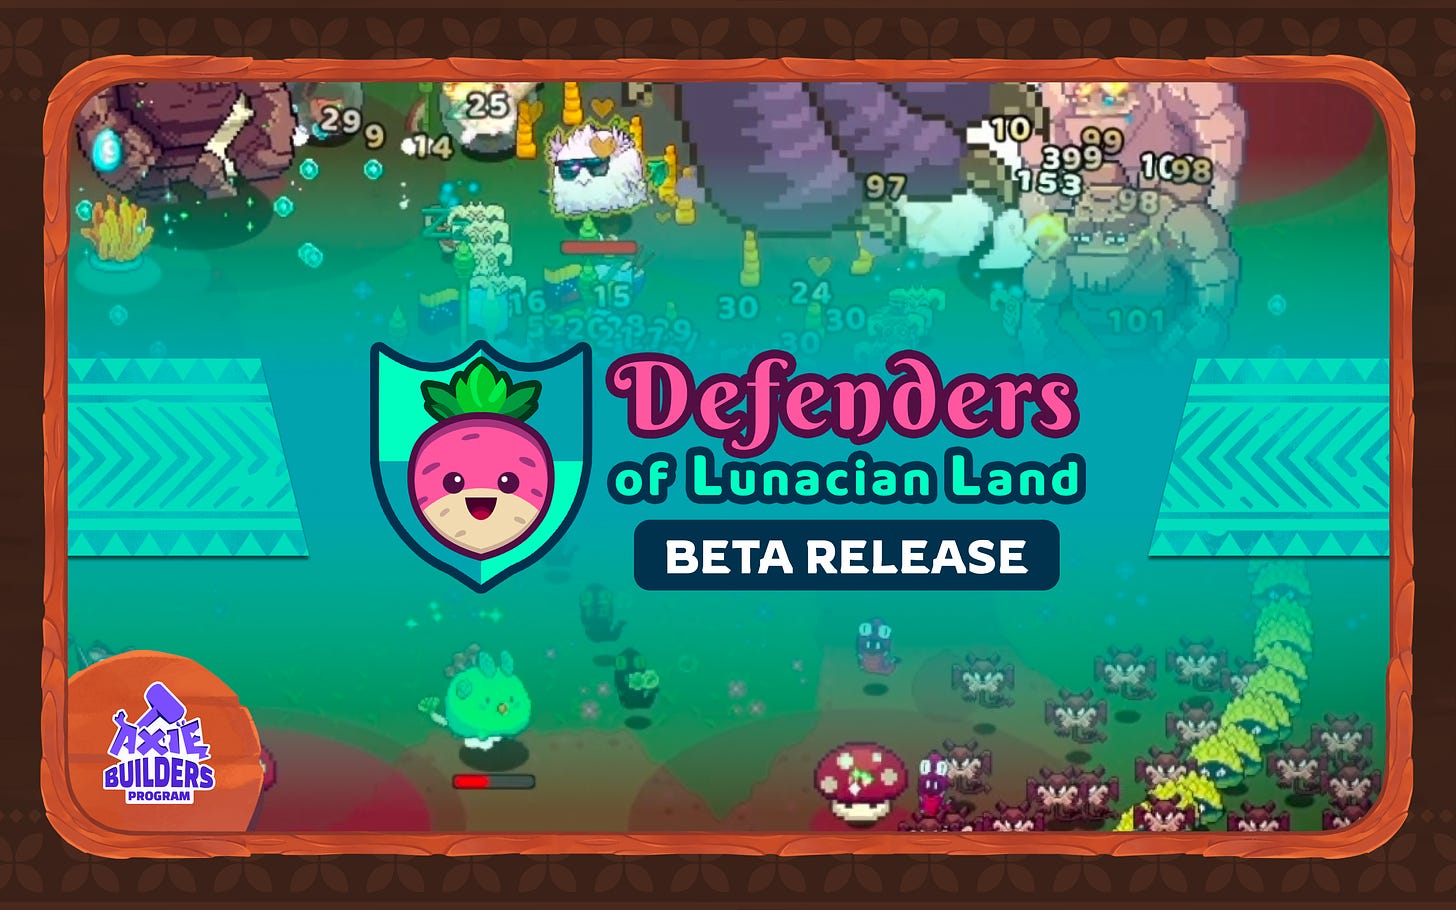 Axie Infinity  Season 19 Update: End Date & Arena Rewards - GameWith